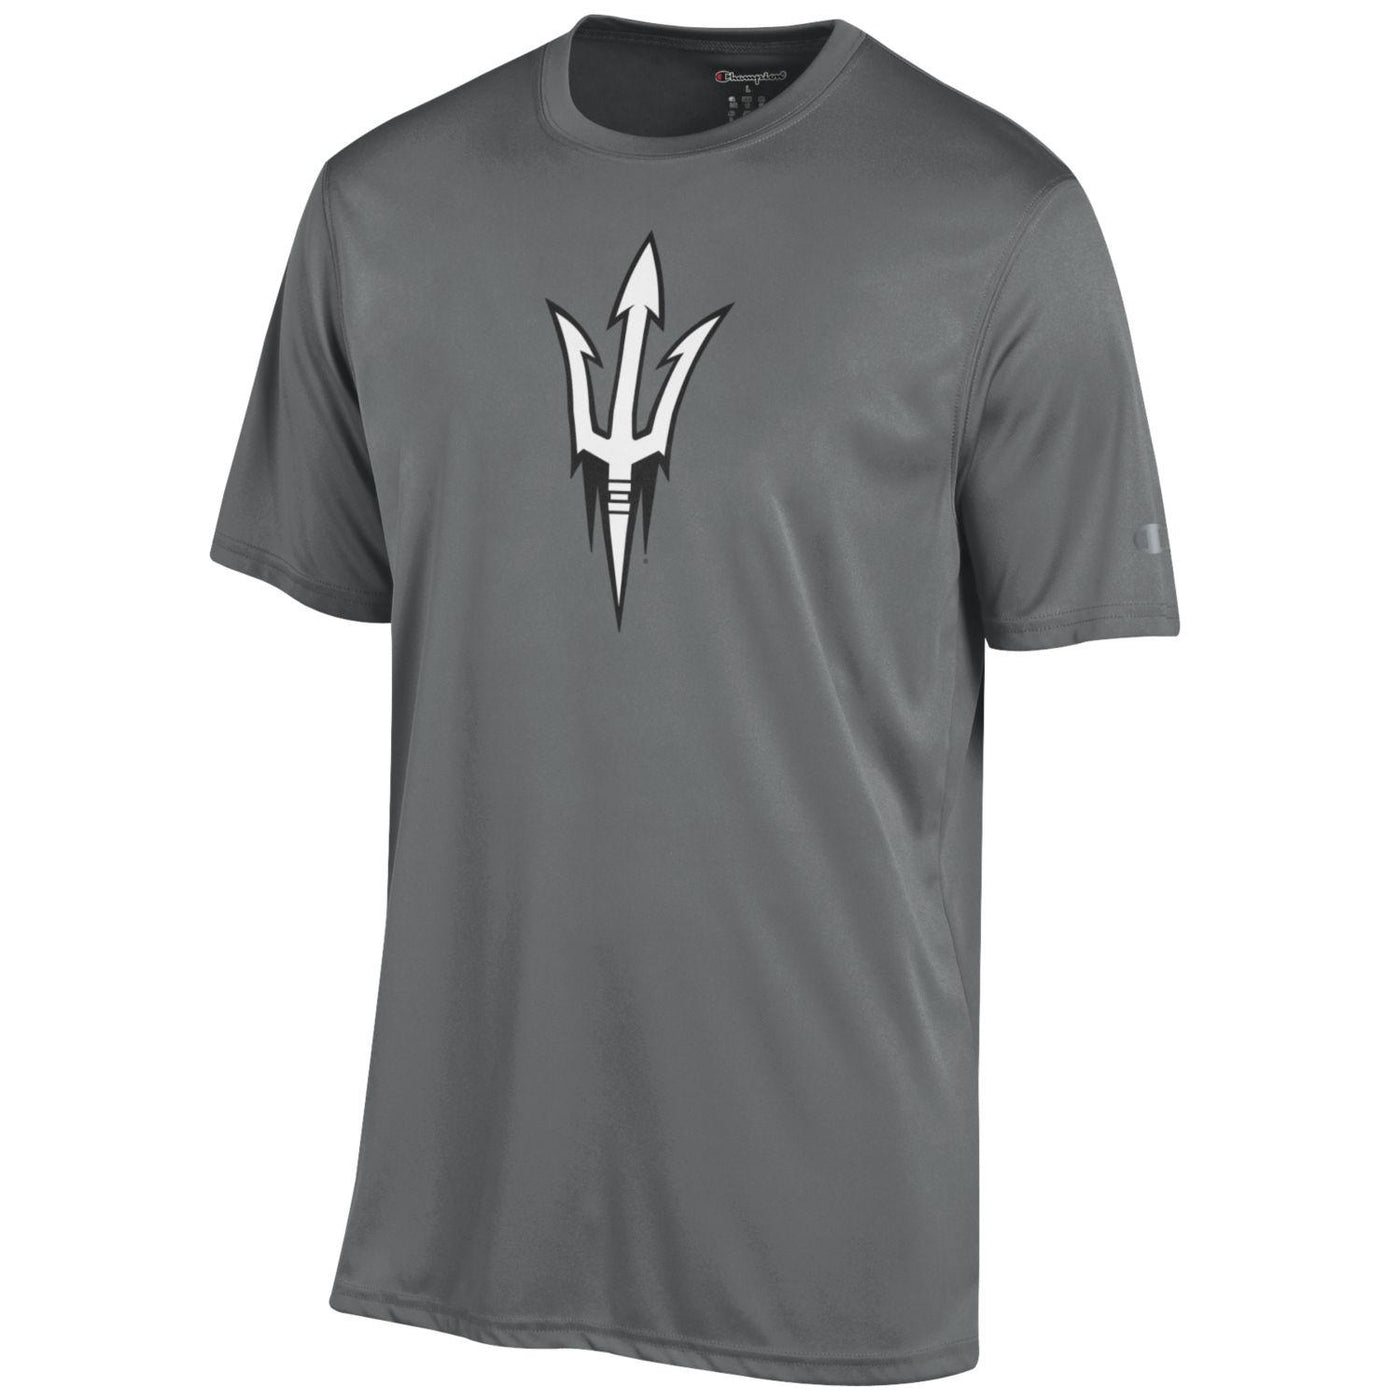 ASU gray athletic tee with pitchfork in white and black